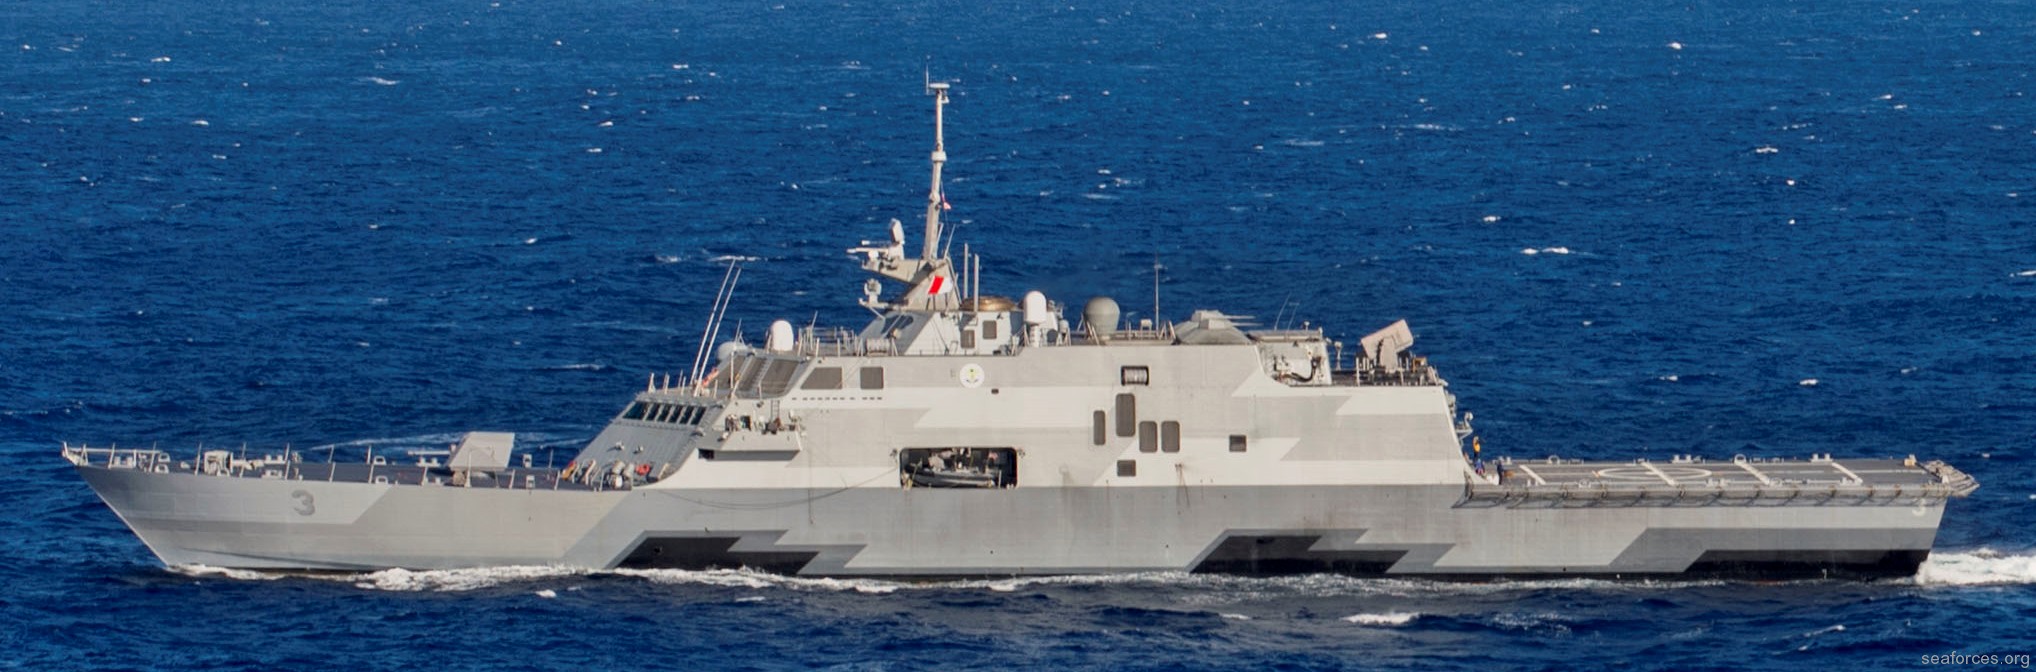 lcs-3 uss fort worth littoral combat ship freedom class us navy 36